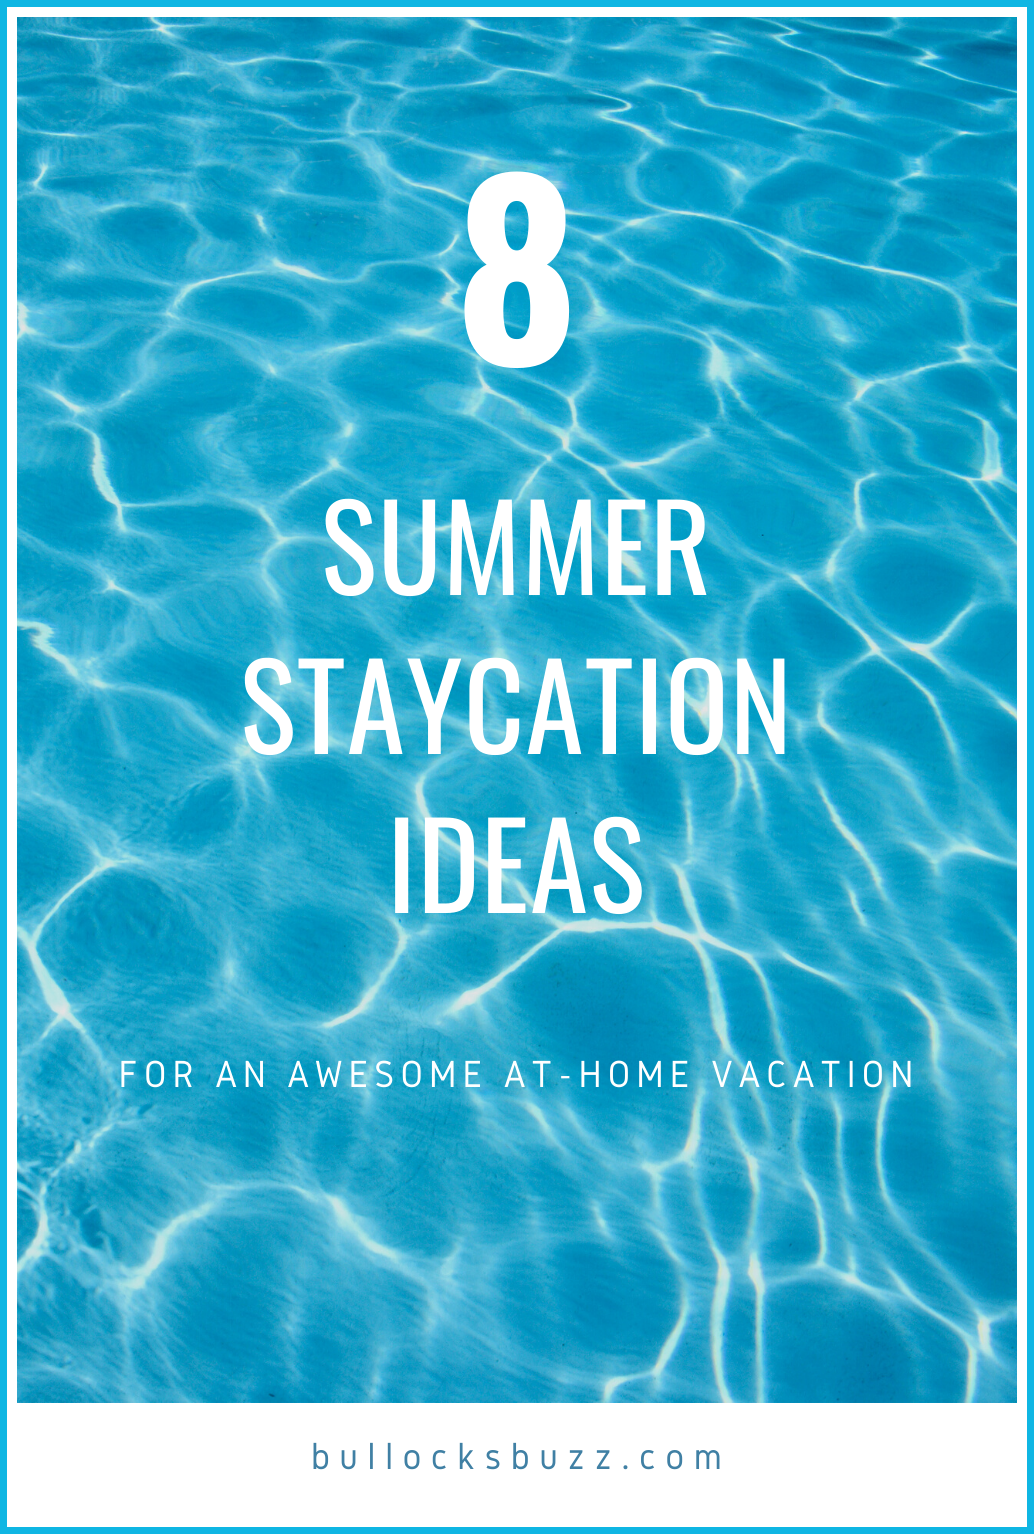 With a little planning and imagination, you can have a staycation of your dreams, whether you are more of a laid back traveler who wants to be pampered, or someone who is more go, go, go - we have you covered with these 8 at-home summer staycation ideas!